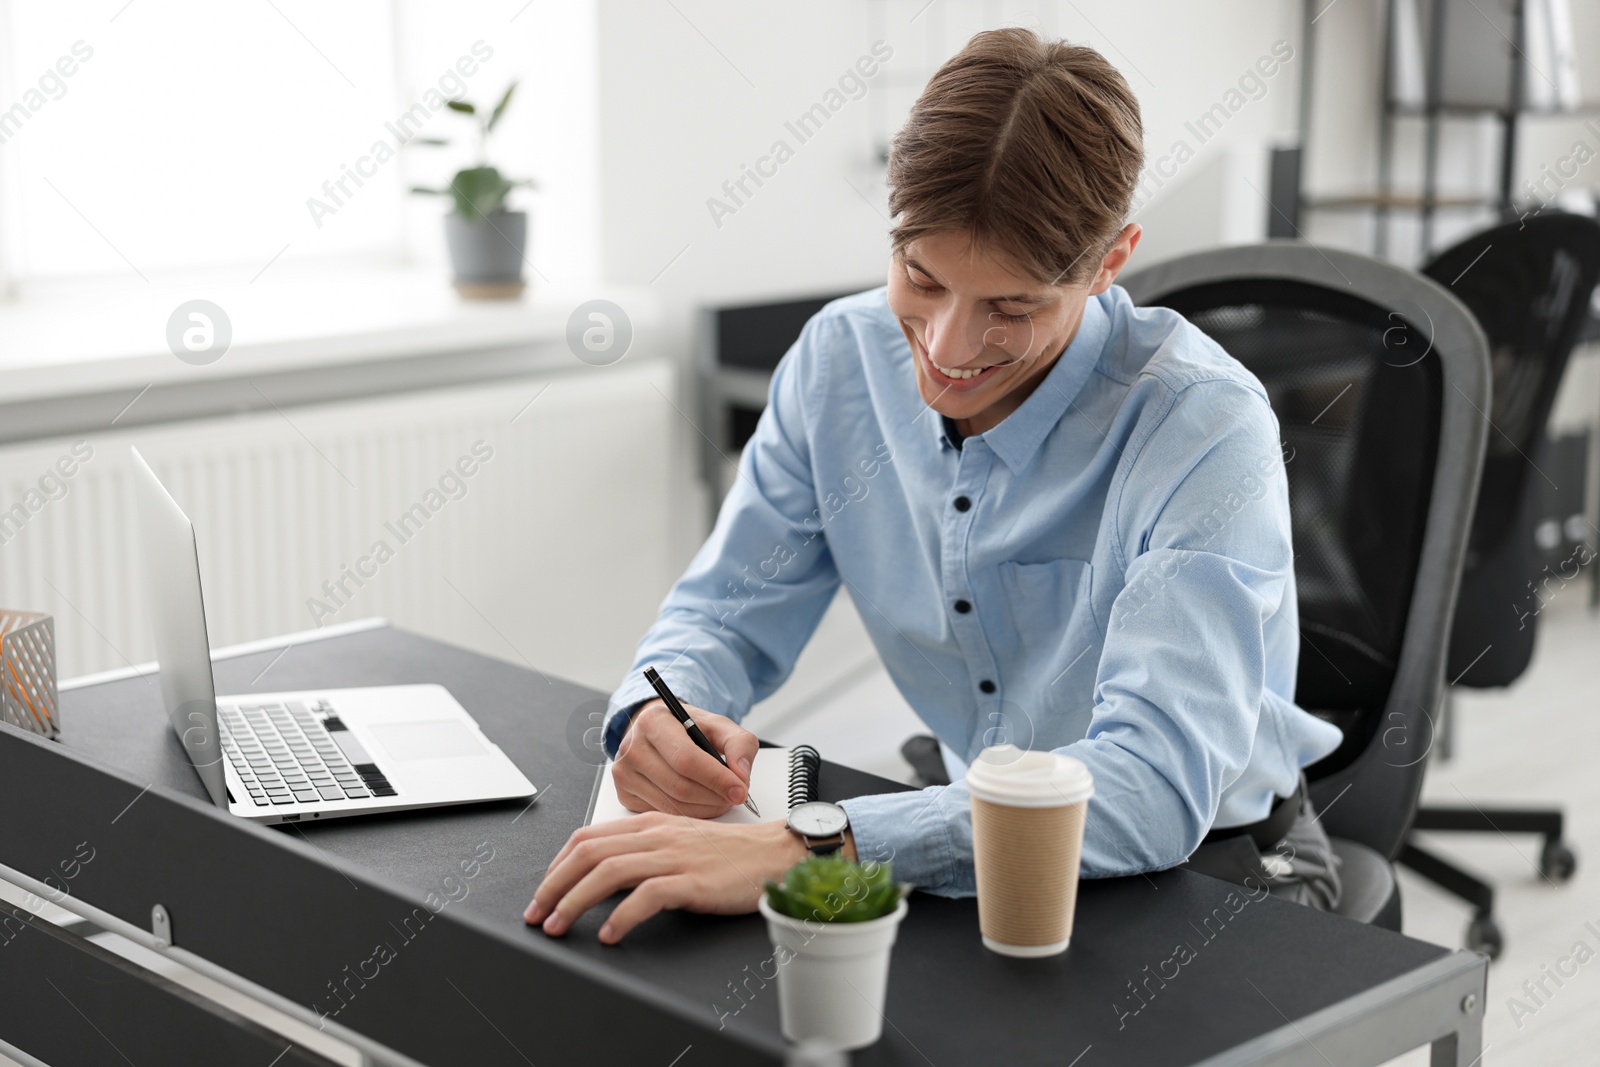 Photo of Man taking notes during webinar at table in office